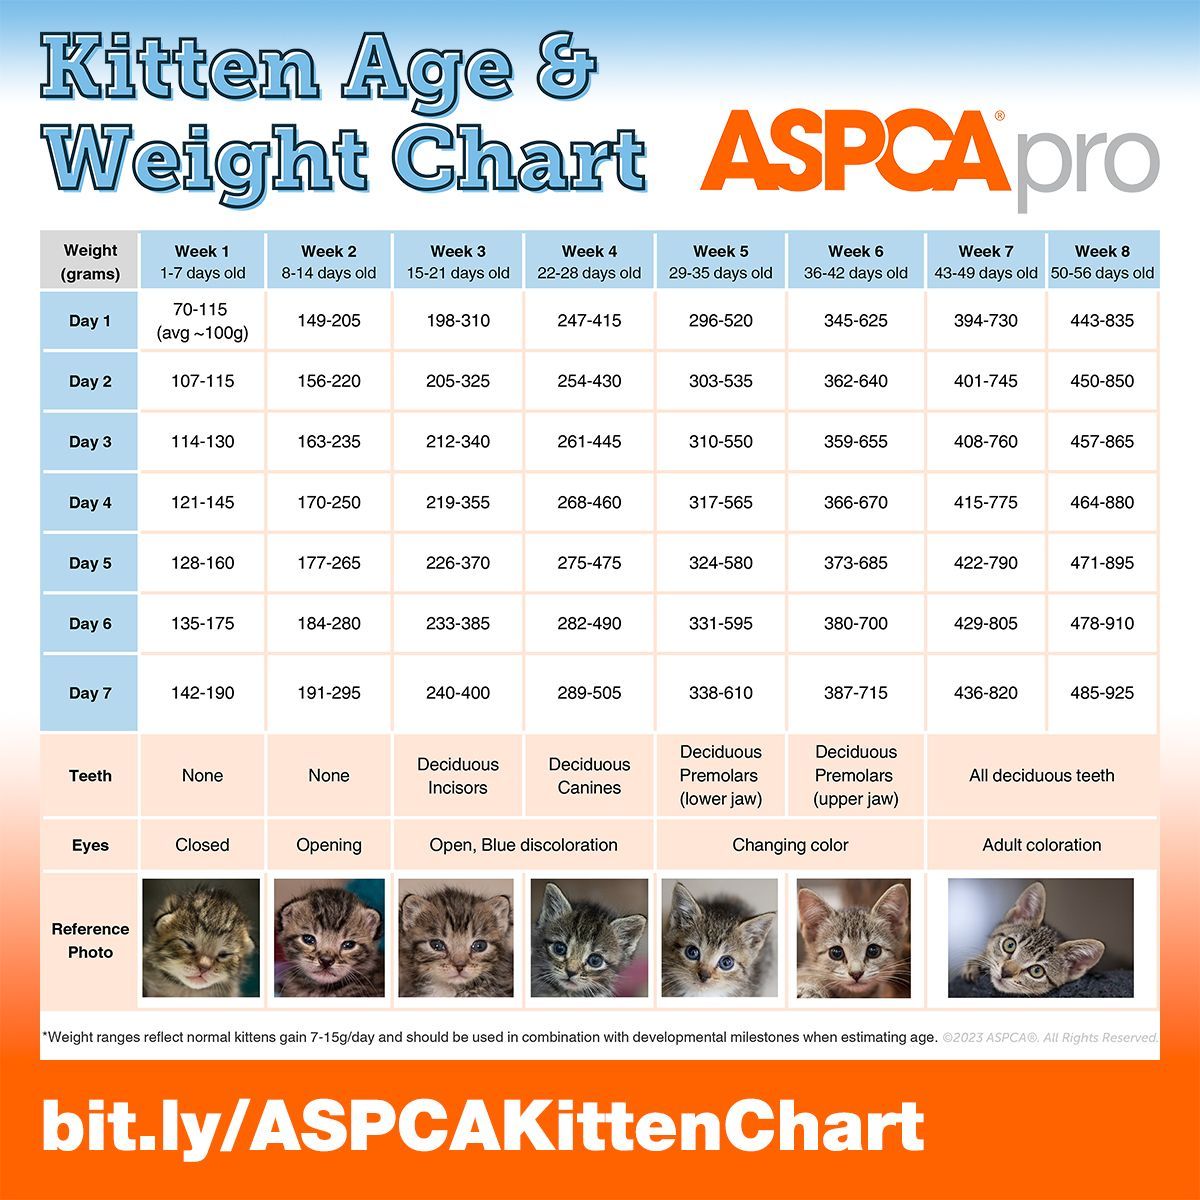 It's #WittleWhiskersWednesday! 💙🐈🐈🐈💛 Knowing a kitten's age is important in determining needs & how to help. @aspcapro's great 'Kitten Age & Weight Chart' details normal weights & developmental milestones: bit.ly/ASPCAKittenCha… @bideawee #nycfci #kittenseason #tnr